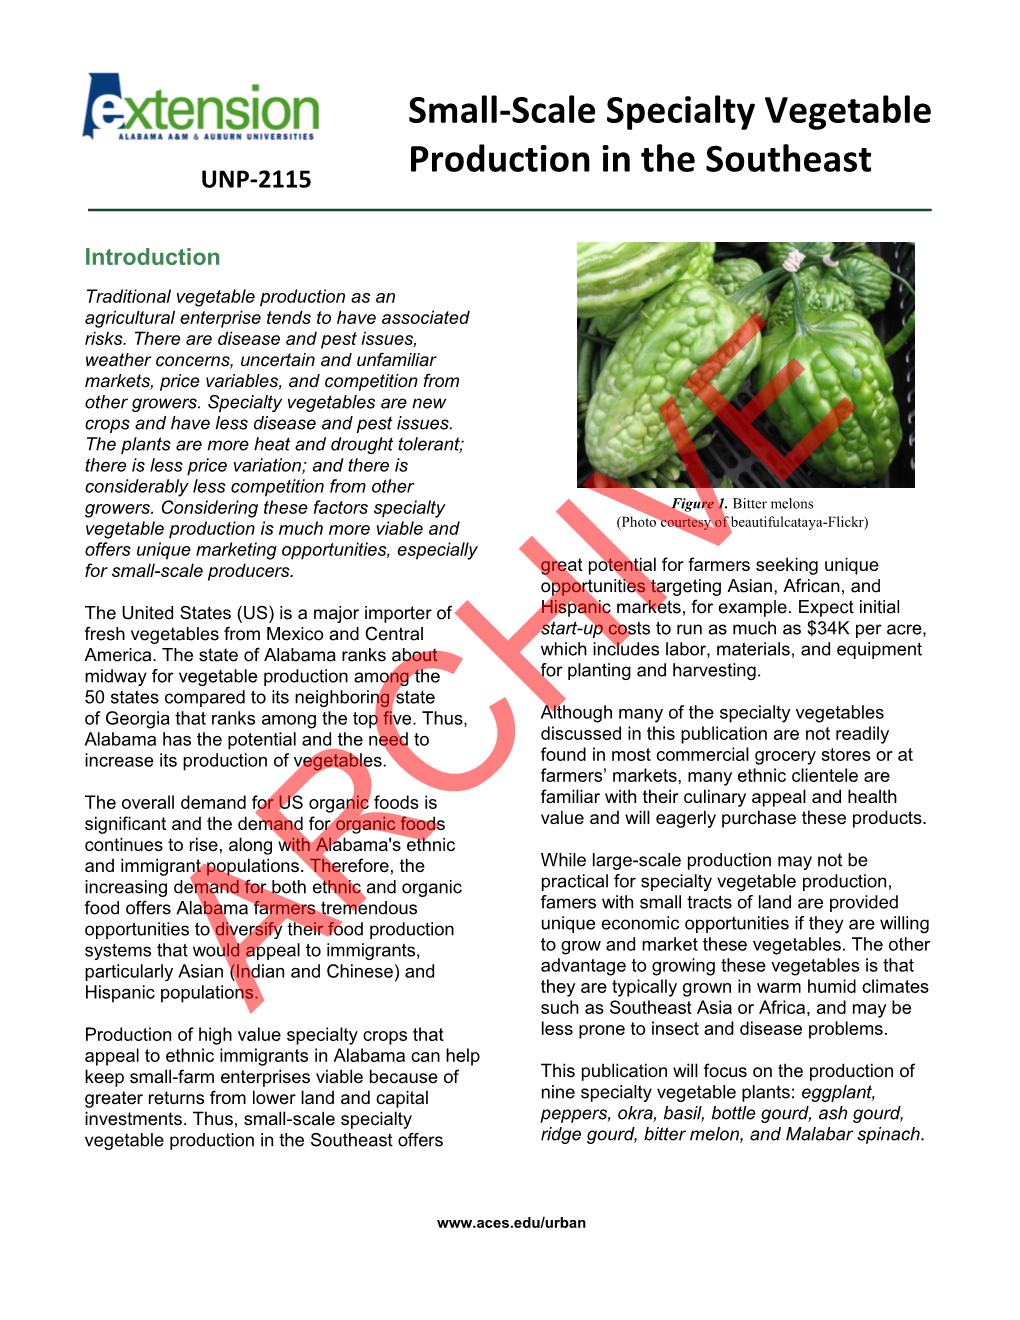 Small-Scale Specialty Vegetable Production in the Southeast